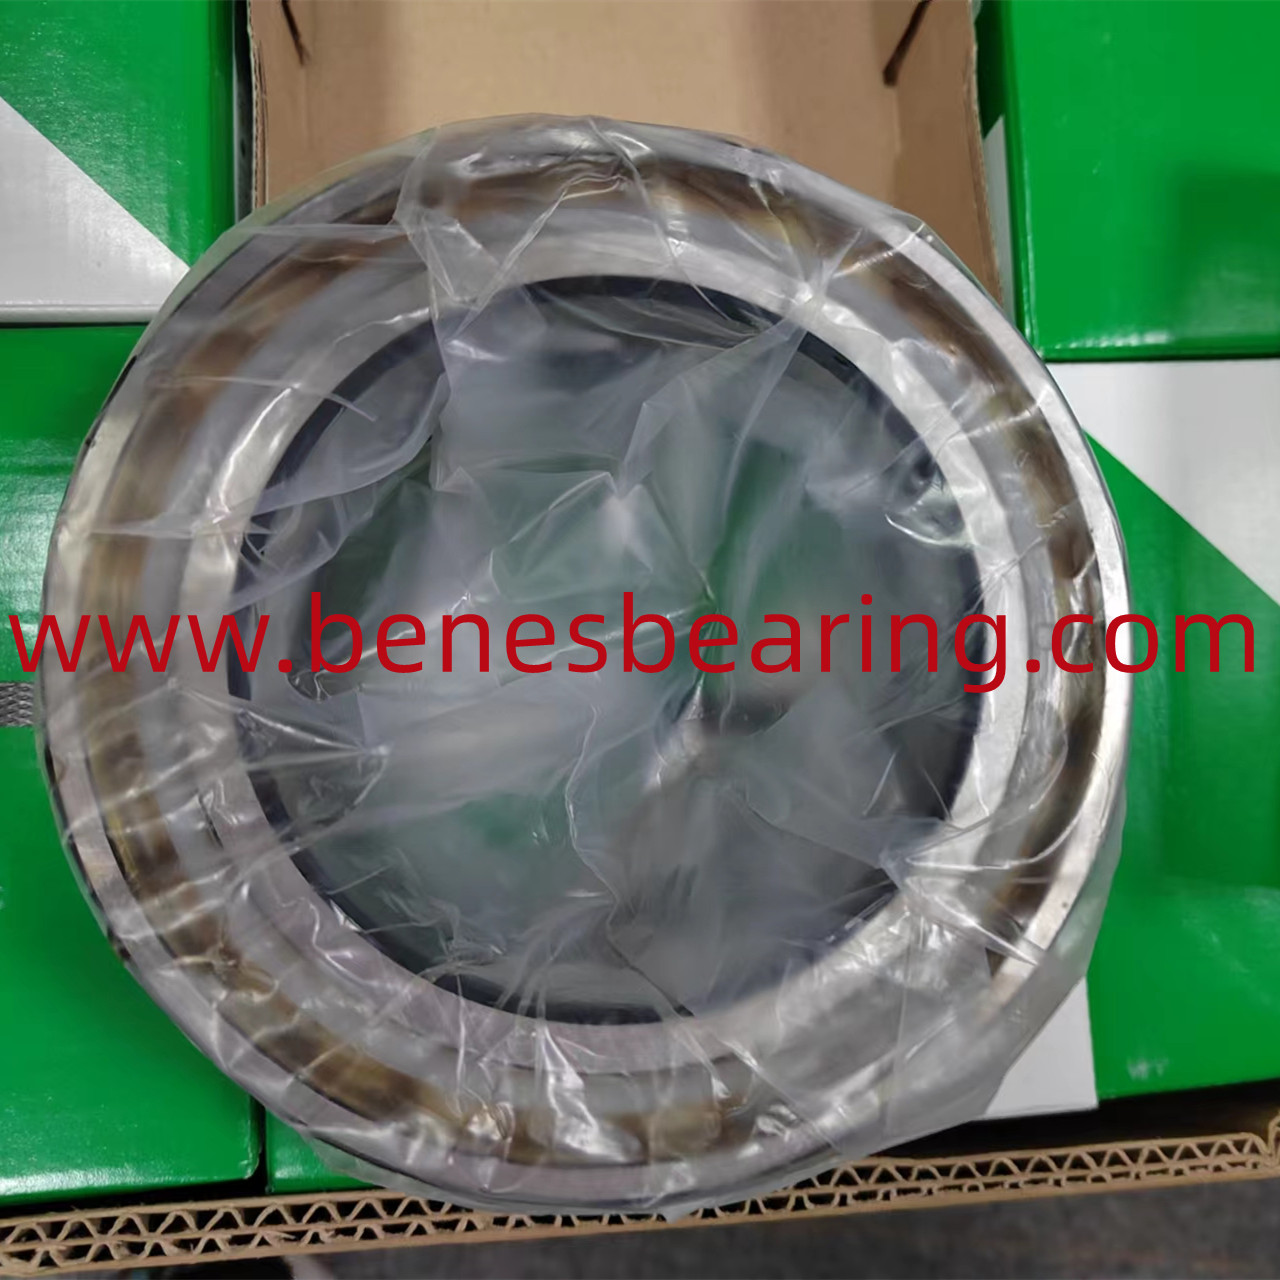 INA SL045020-D-PP Cylindrical Roller Bearing Double Row   Made in Germany   100X150X67mm 3.95KG